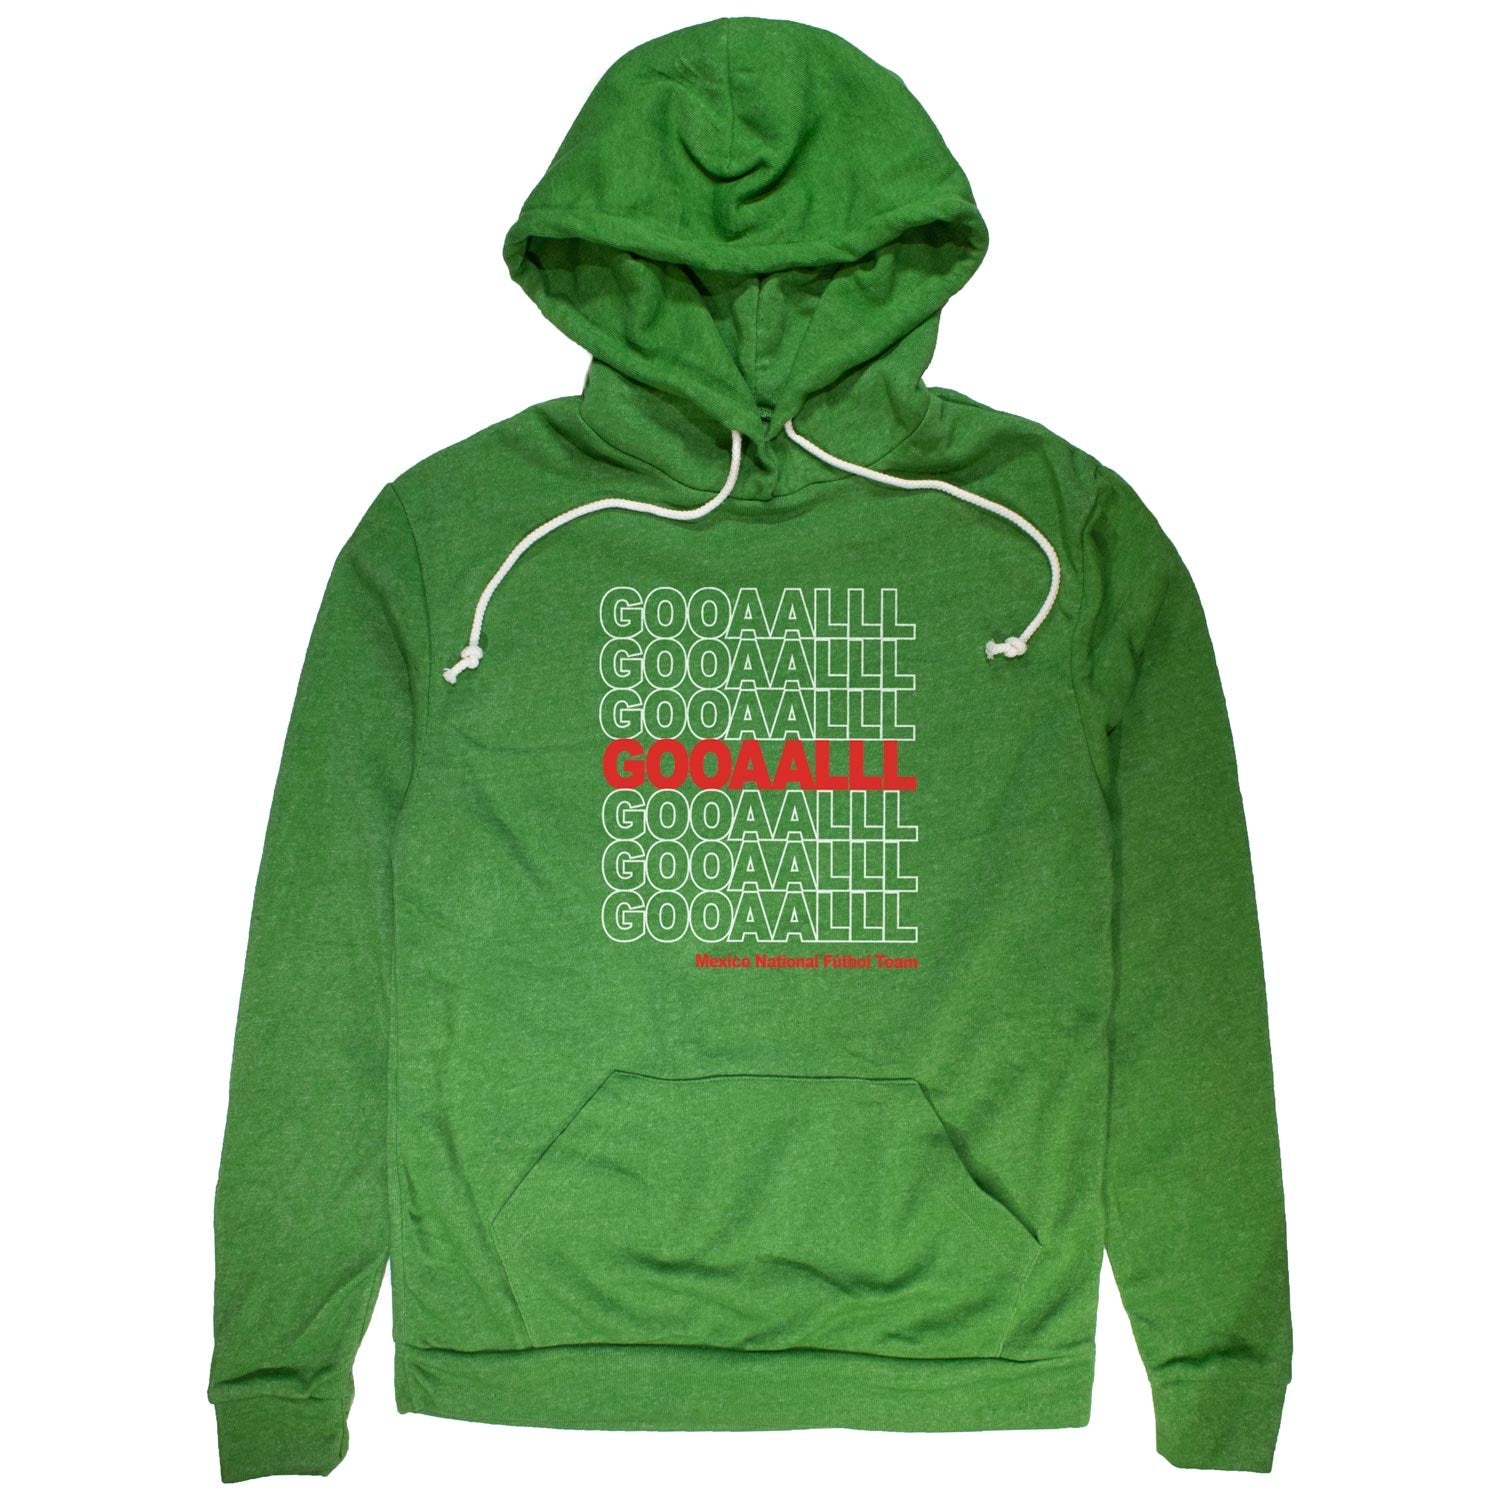 Unisex Mexico Soccer Gooaalll Graphic Hoodie | Vintage Football World Cup Fleece | Solid Threads